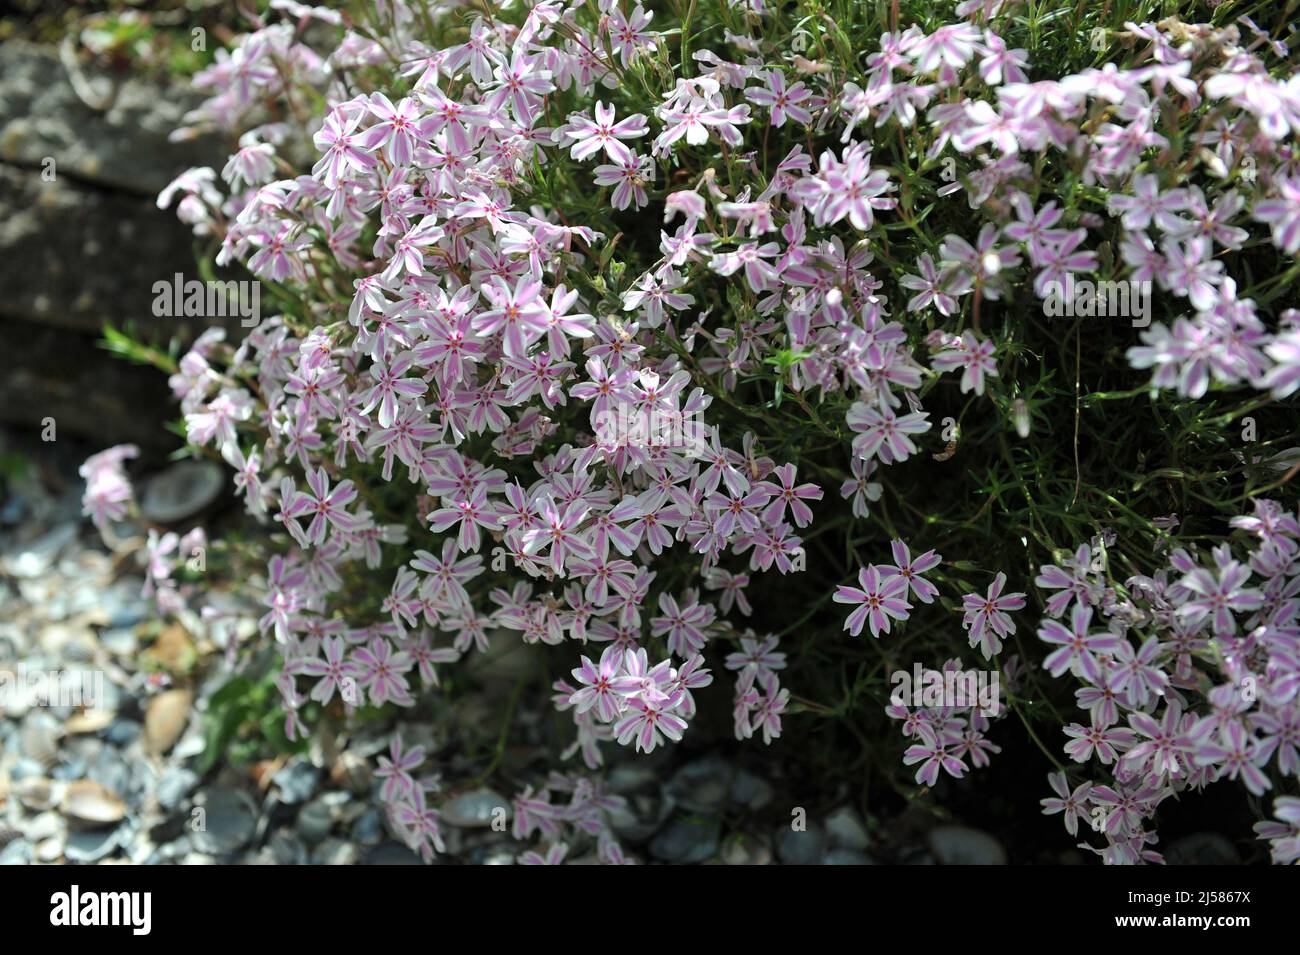 White with pink stripes moss phlox (Phlox subulata) Candy Stripe bloom in a garden in May Stock Photo